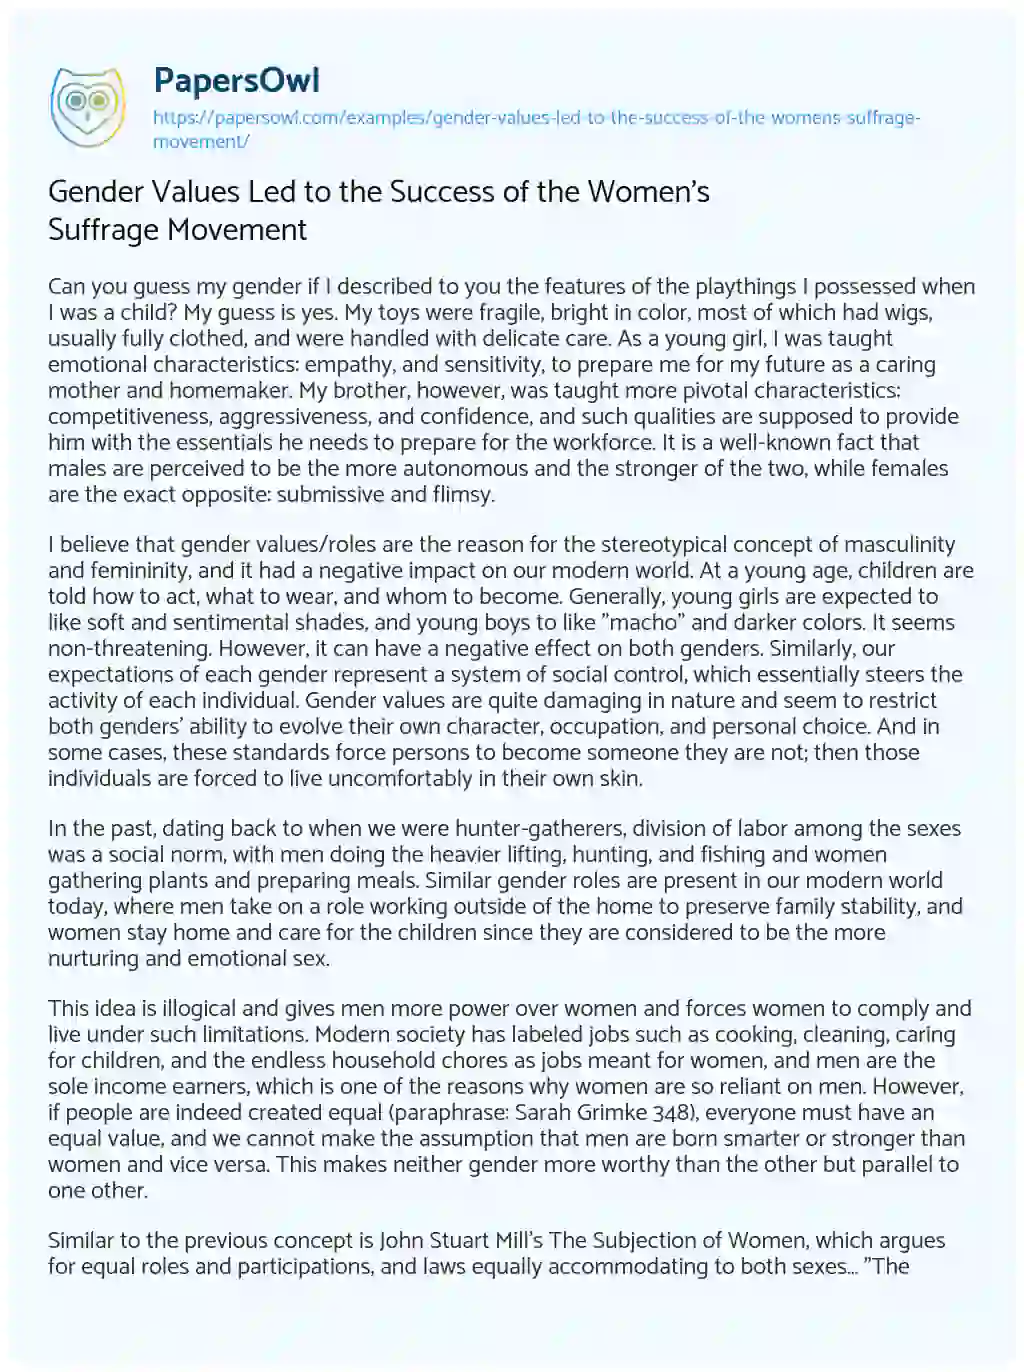 Essay on Gender Values Led to the Success of the Women’s Suffrage Movement